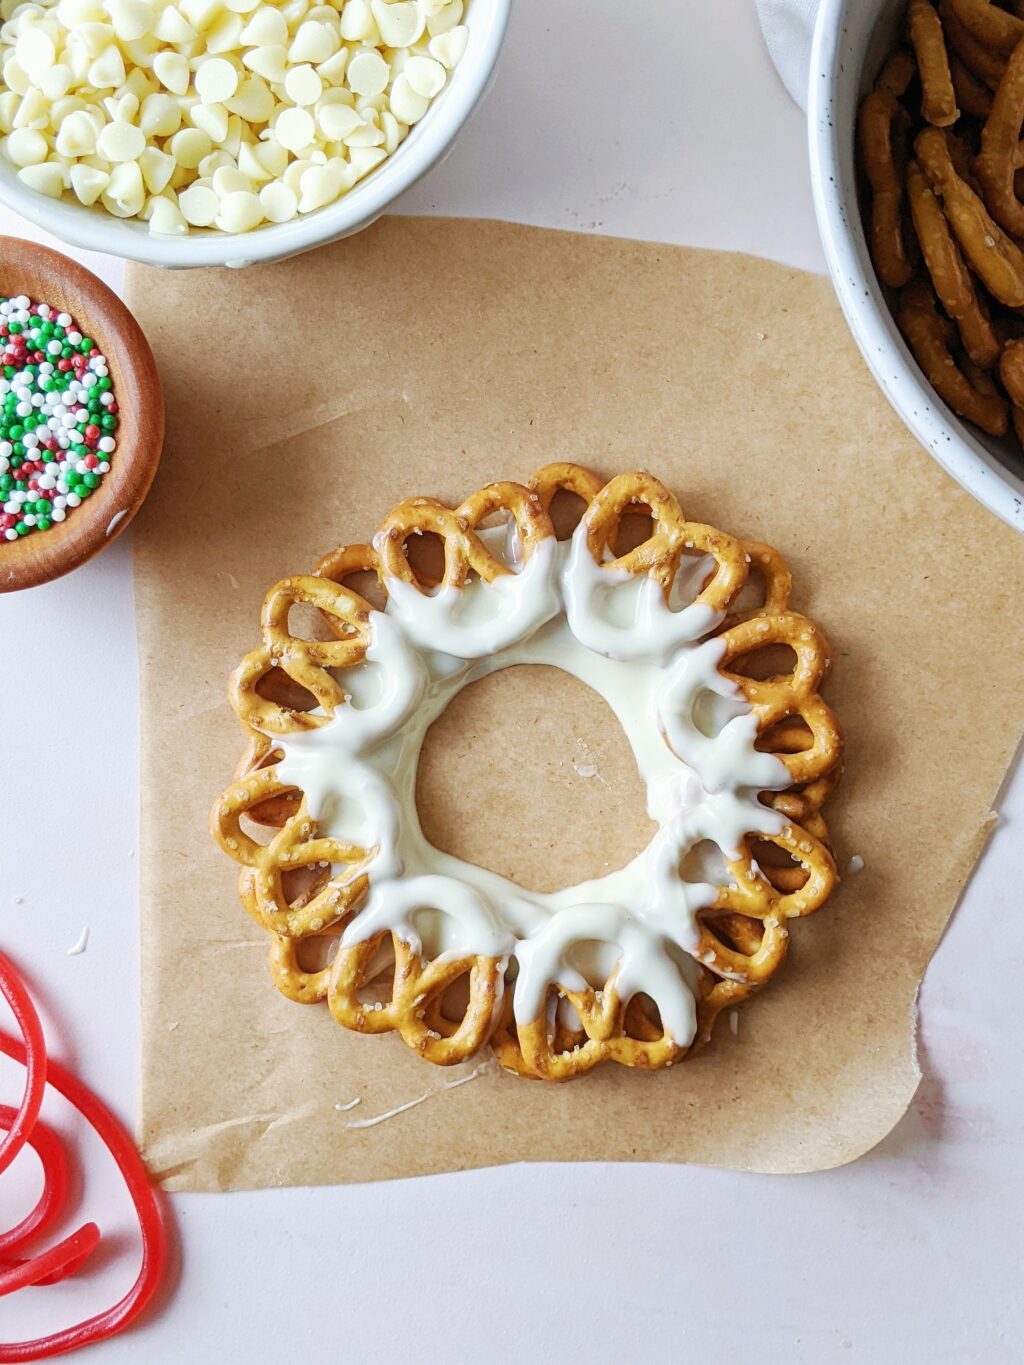 another layer of pretzels dipped in white chocolate